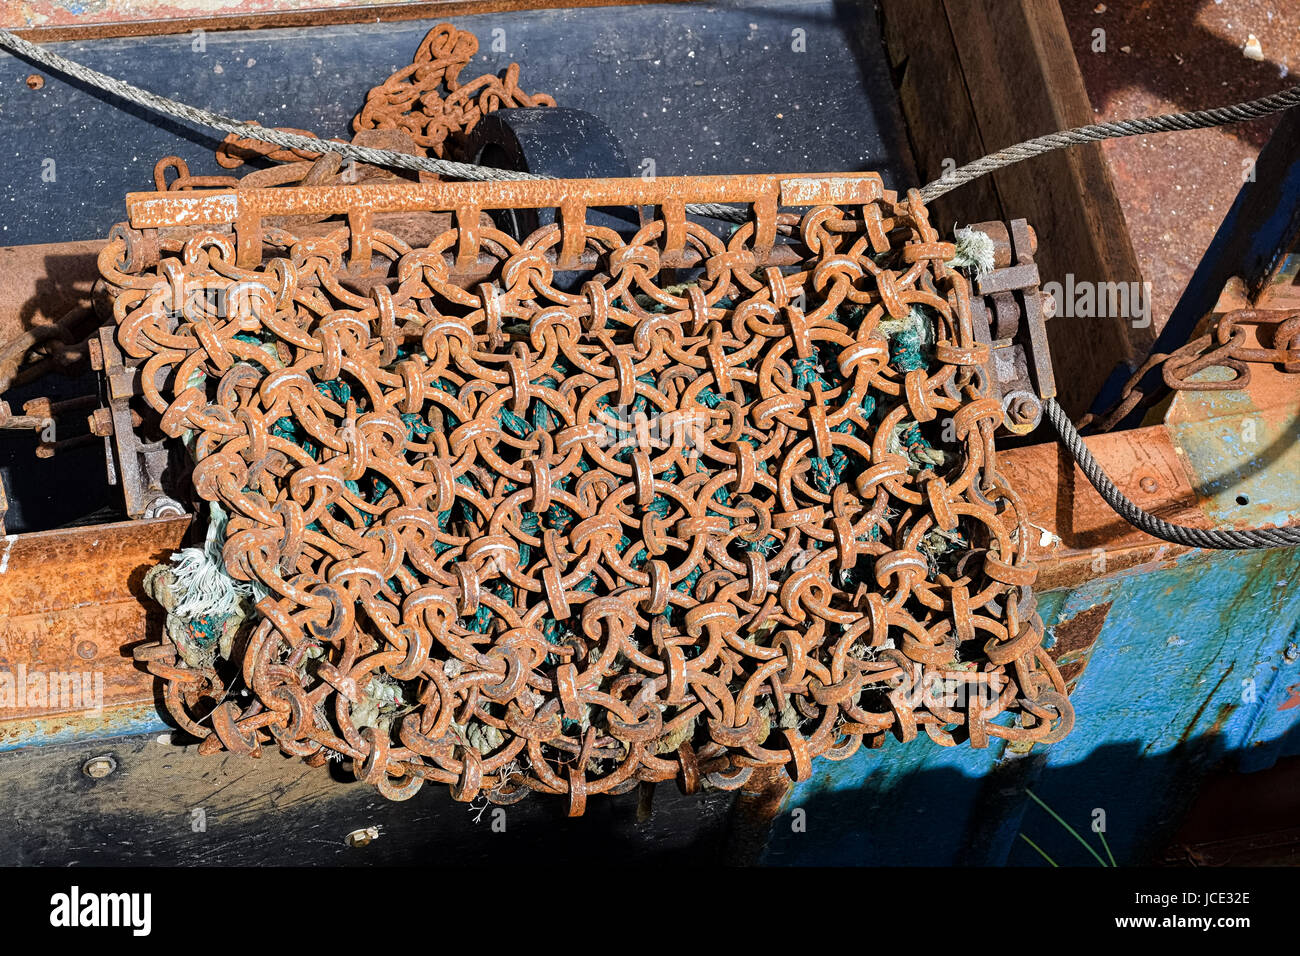 Metal scallop dredger net on deck of boat with rope underneath Stock Photo